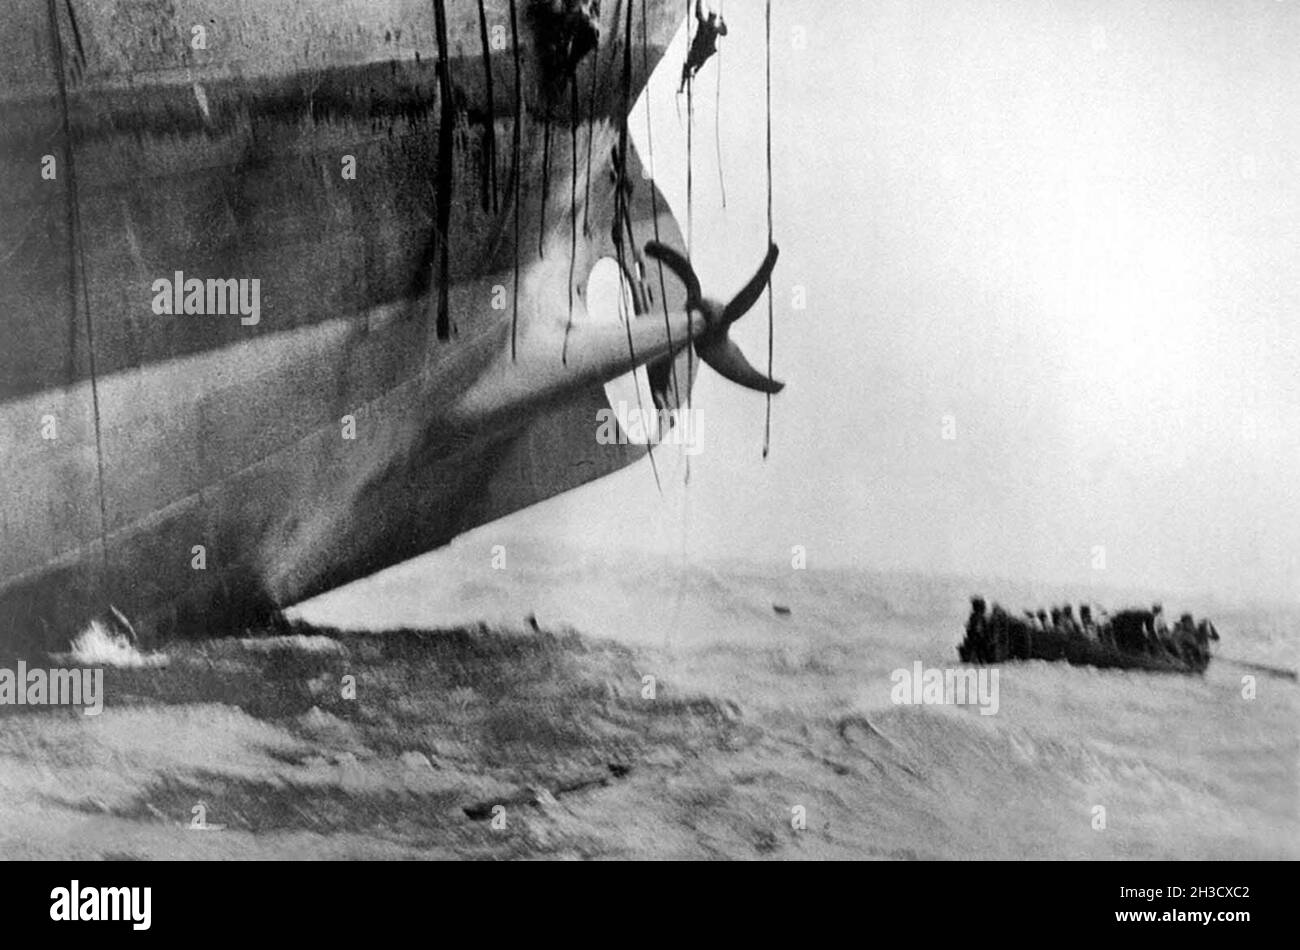 A dramatic photo of a lifeboat pulling away from a sinking ship. The stern of the ship is in the air and the last crew members can be seen descending the ropes. Stock Photo